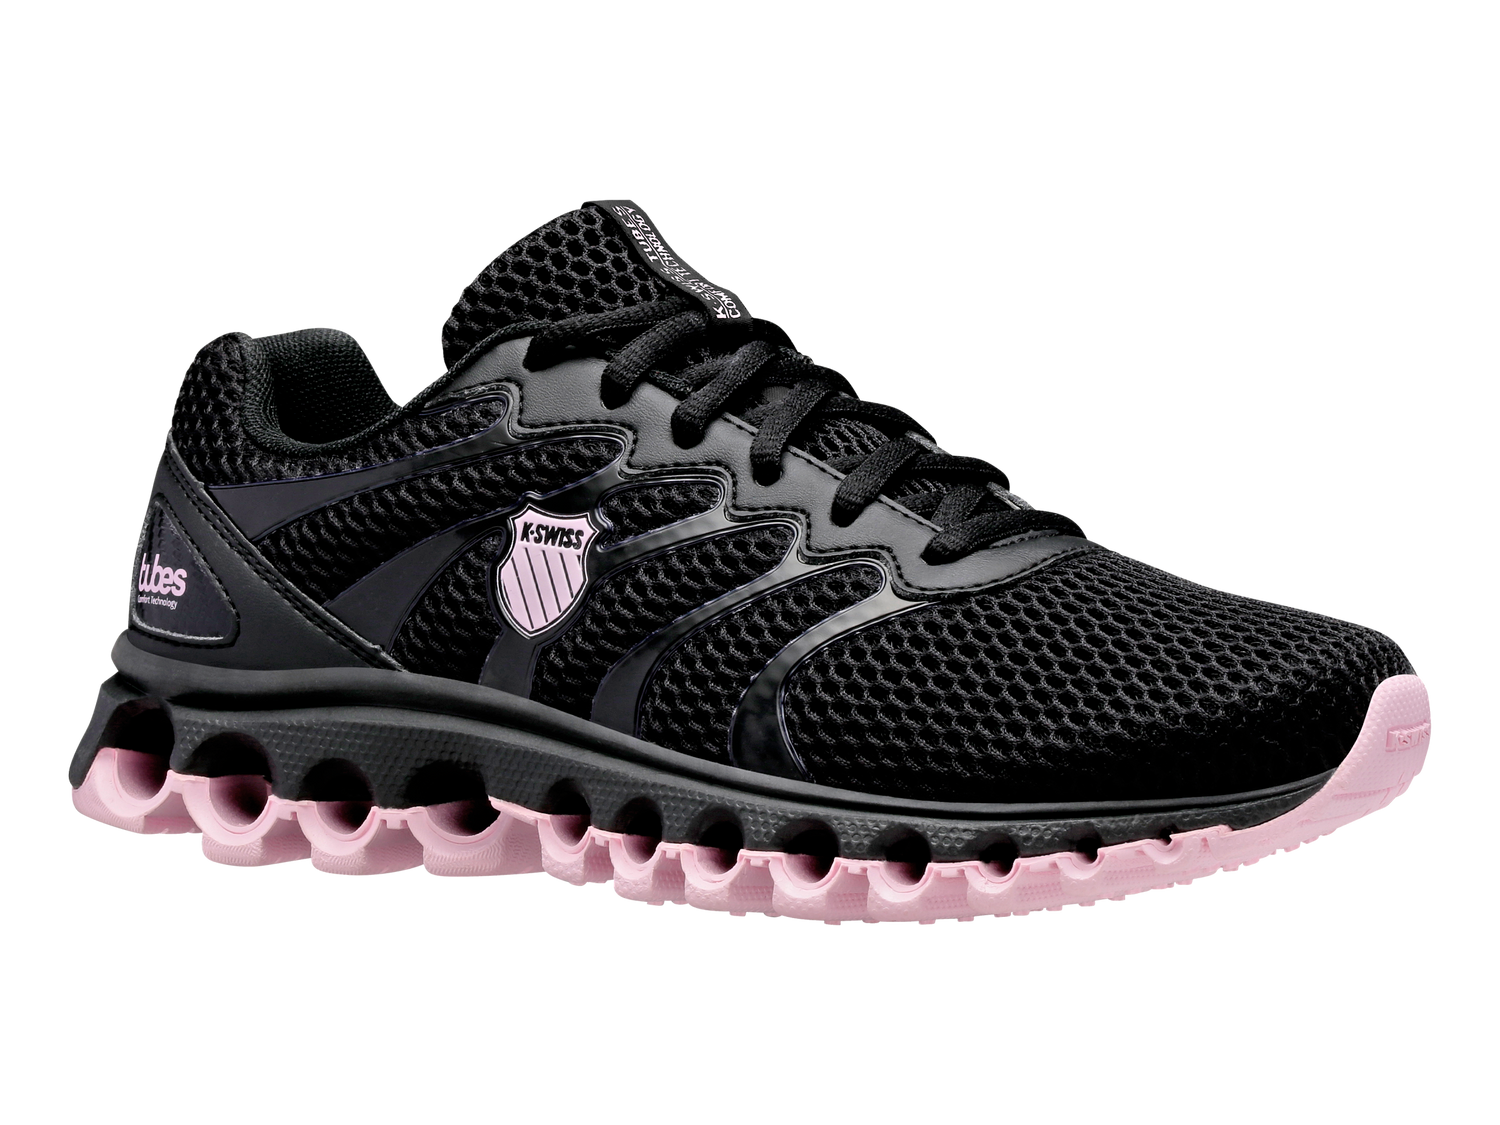 K-Swiss Women's Tubes 200 Active Shoes in Black/Cherry Blossom